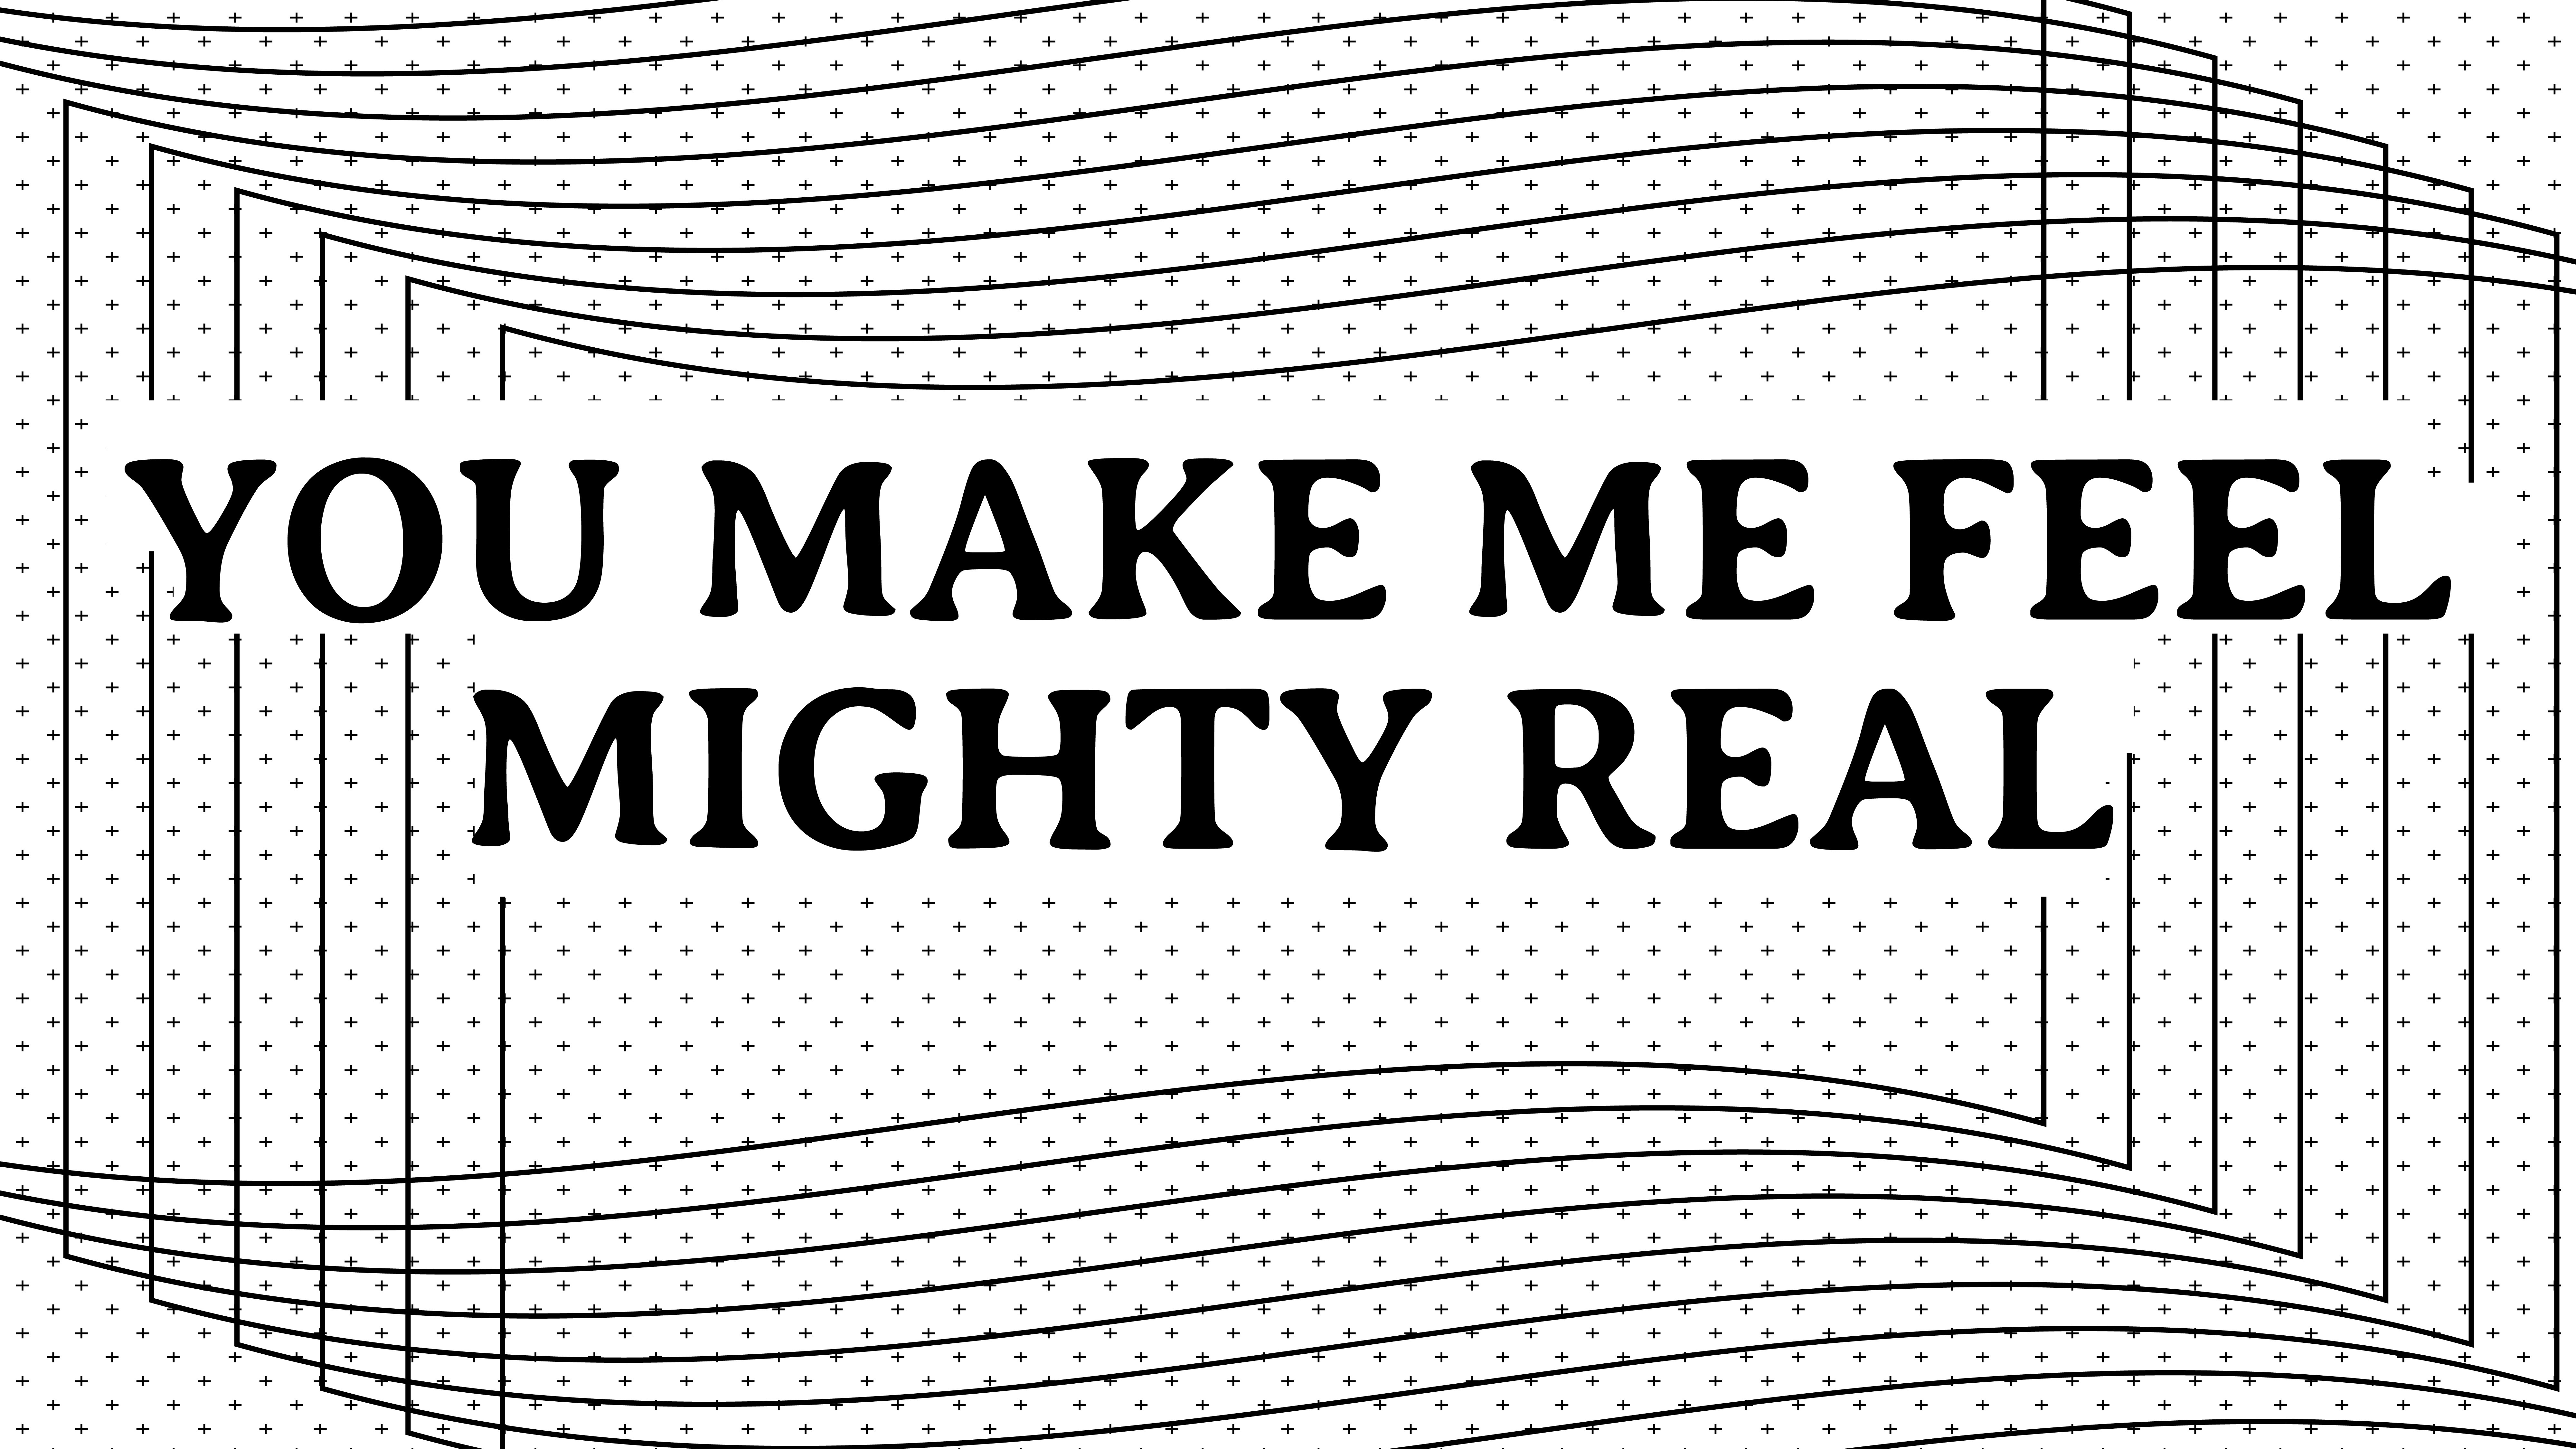 YOU MAKE ME FEEL MIGHTY REAL